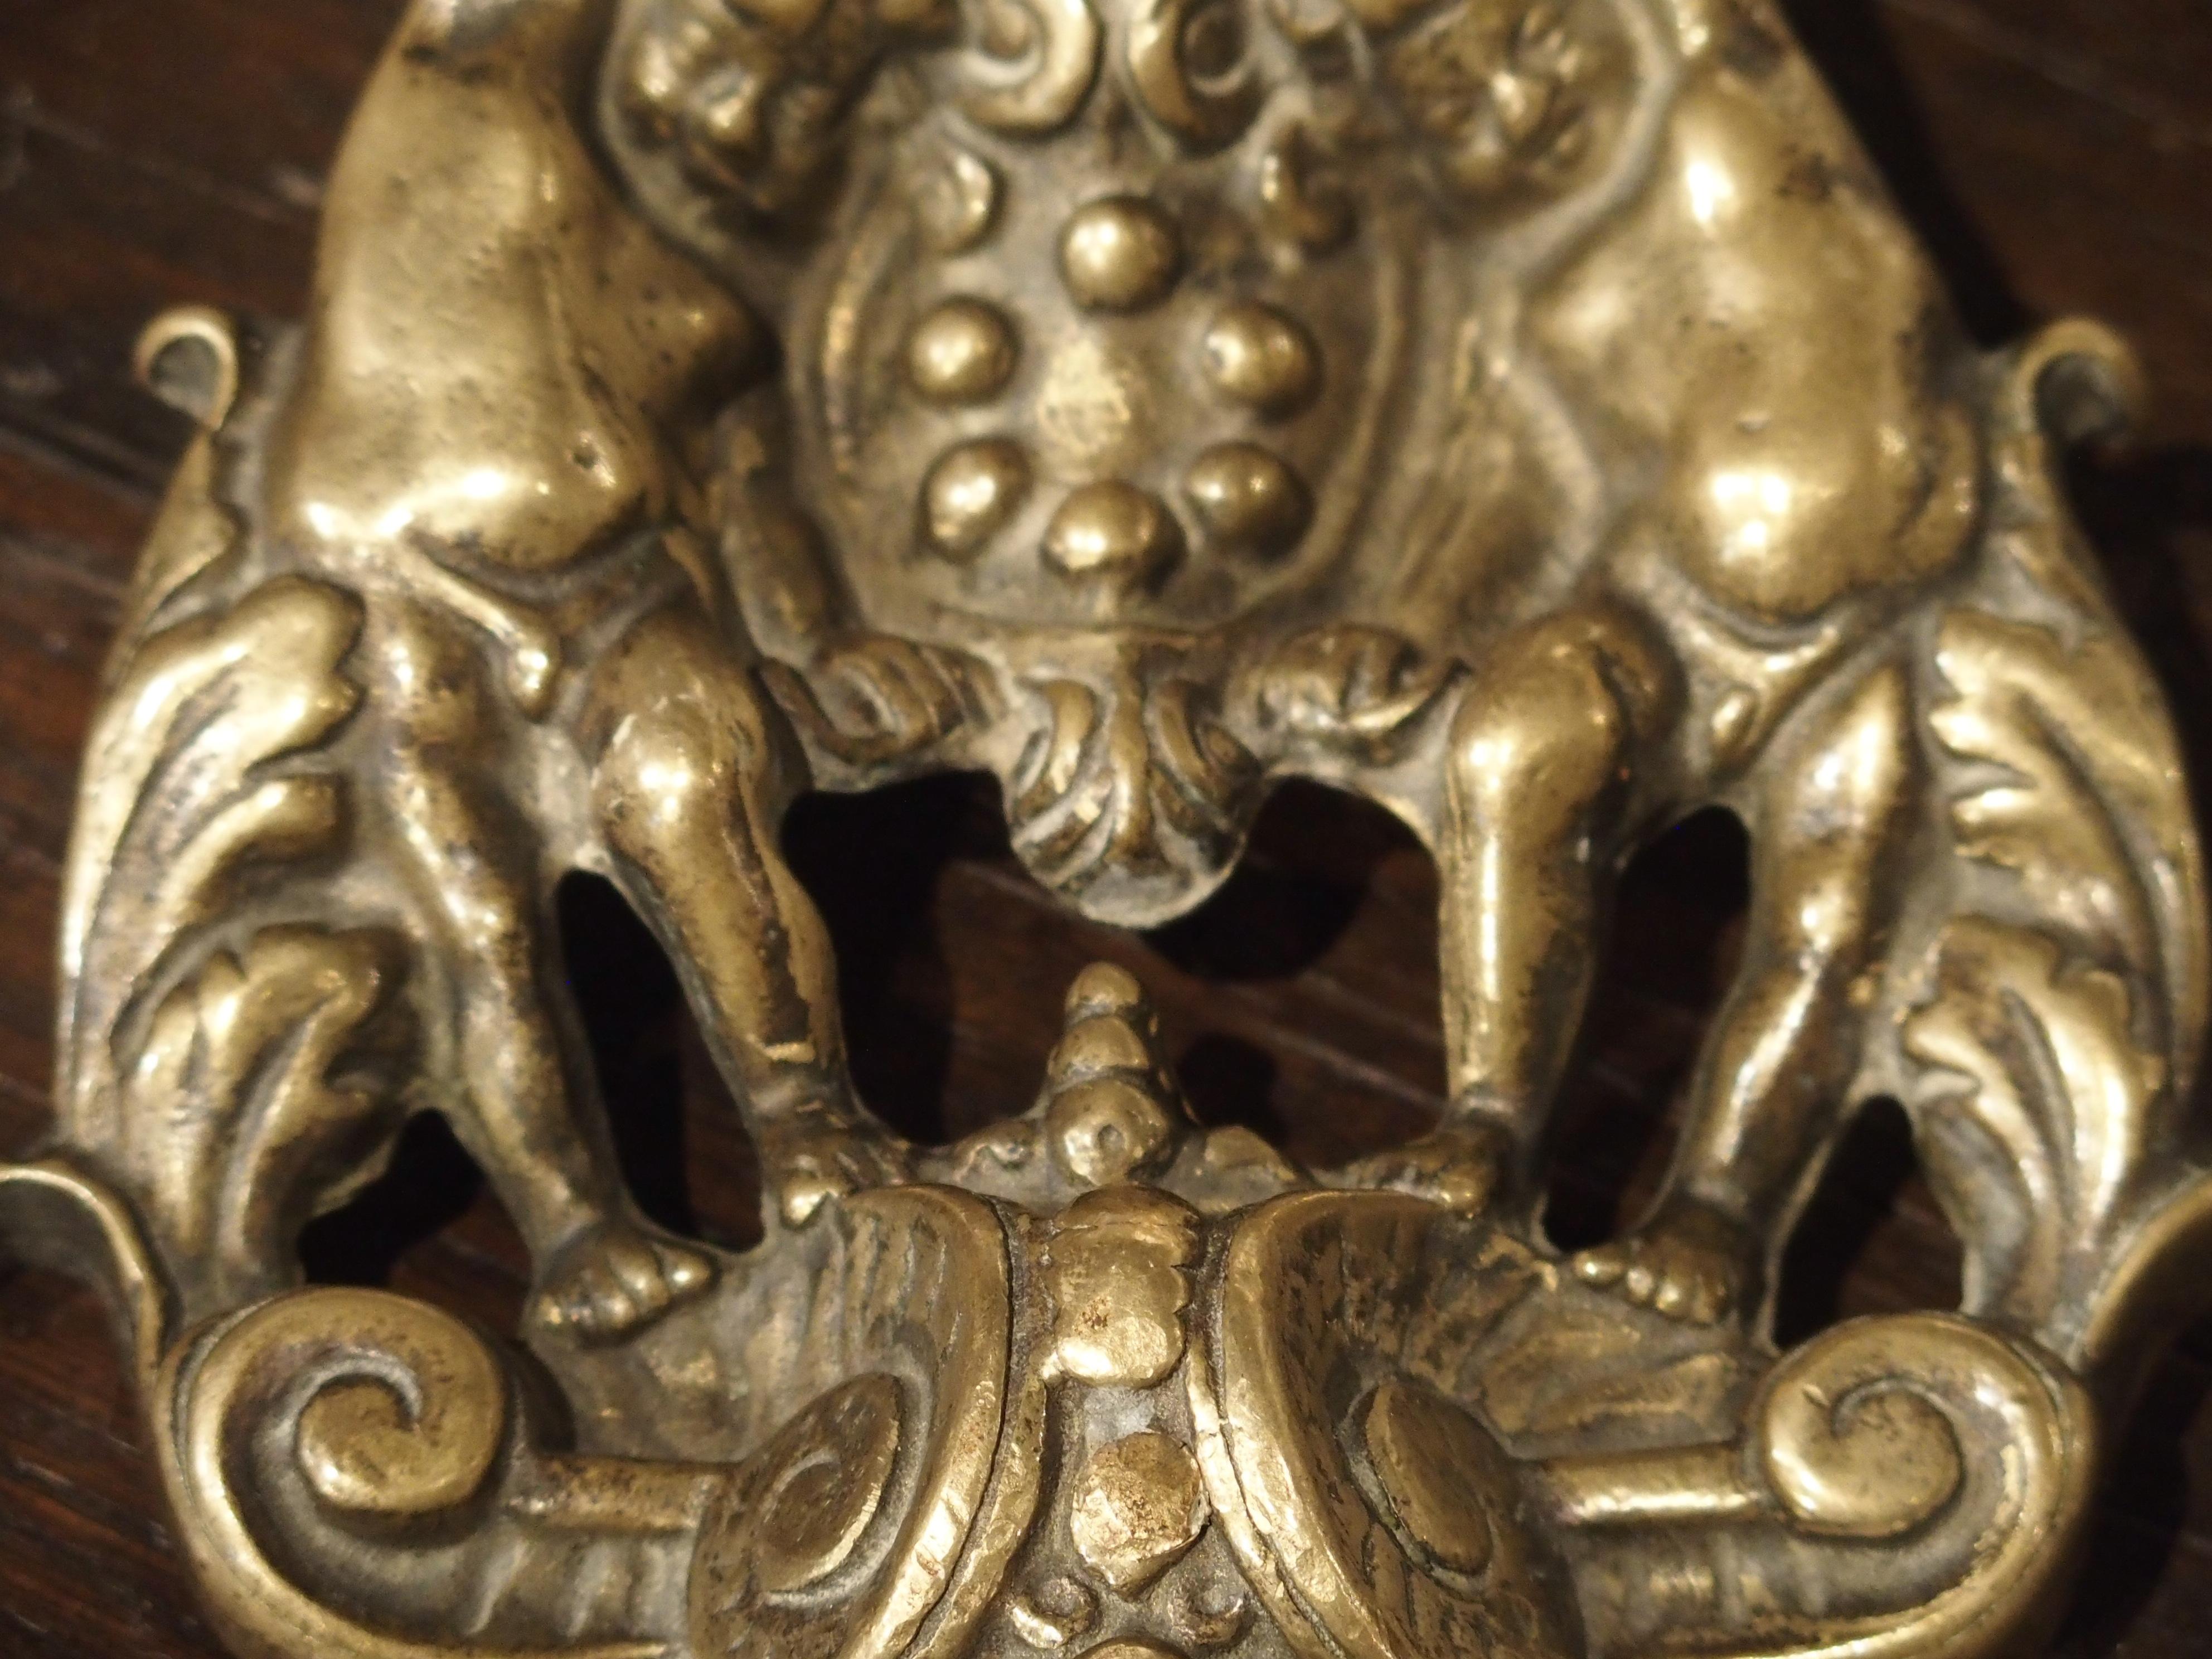 Produced in Italy in the late 1800s, this impressive bronze dore door knocker contains various Classic design elements including putti, a coat of arms, and a large mascaron. Similar door knockers were first produced in Italy during the